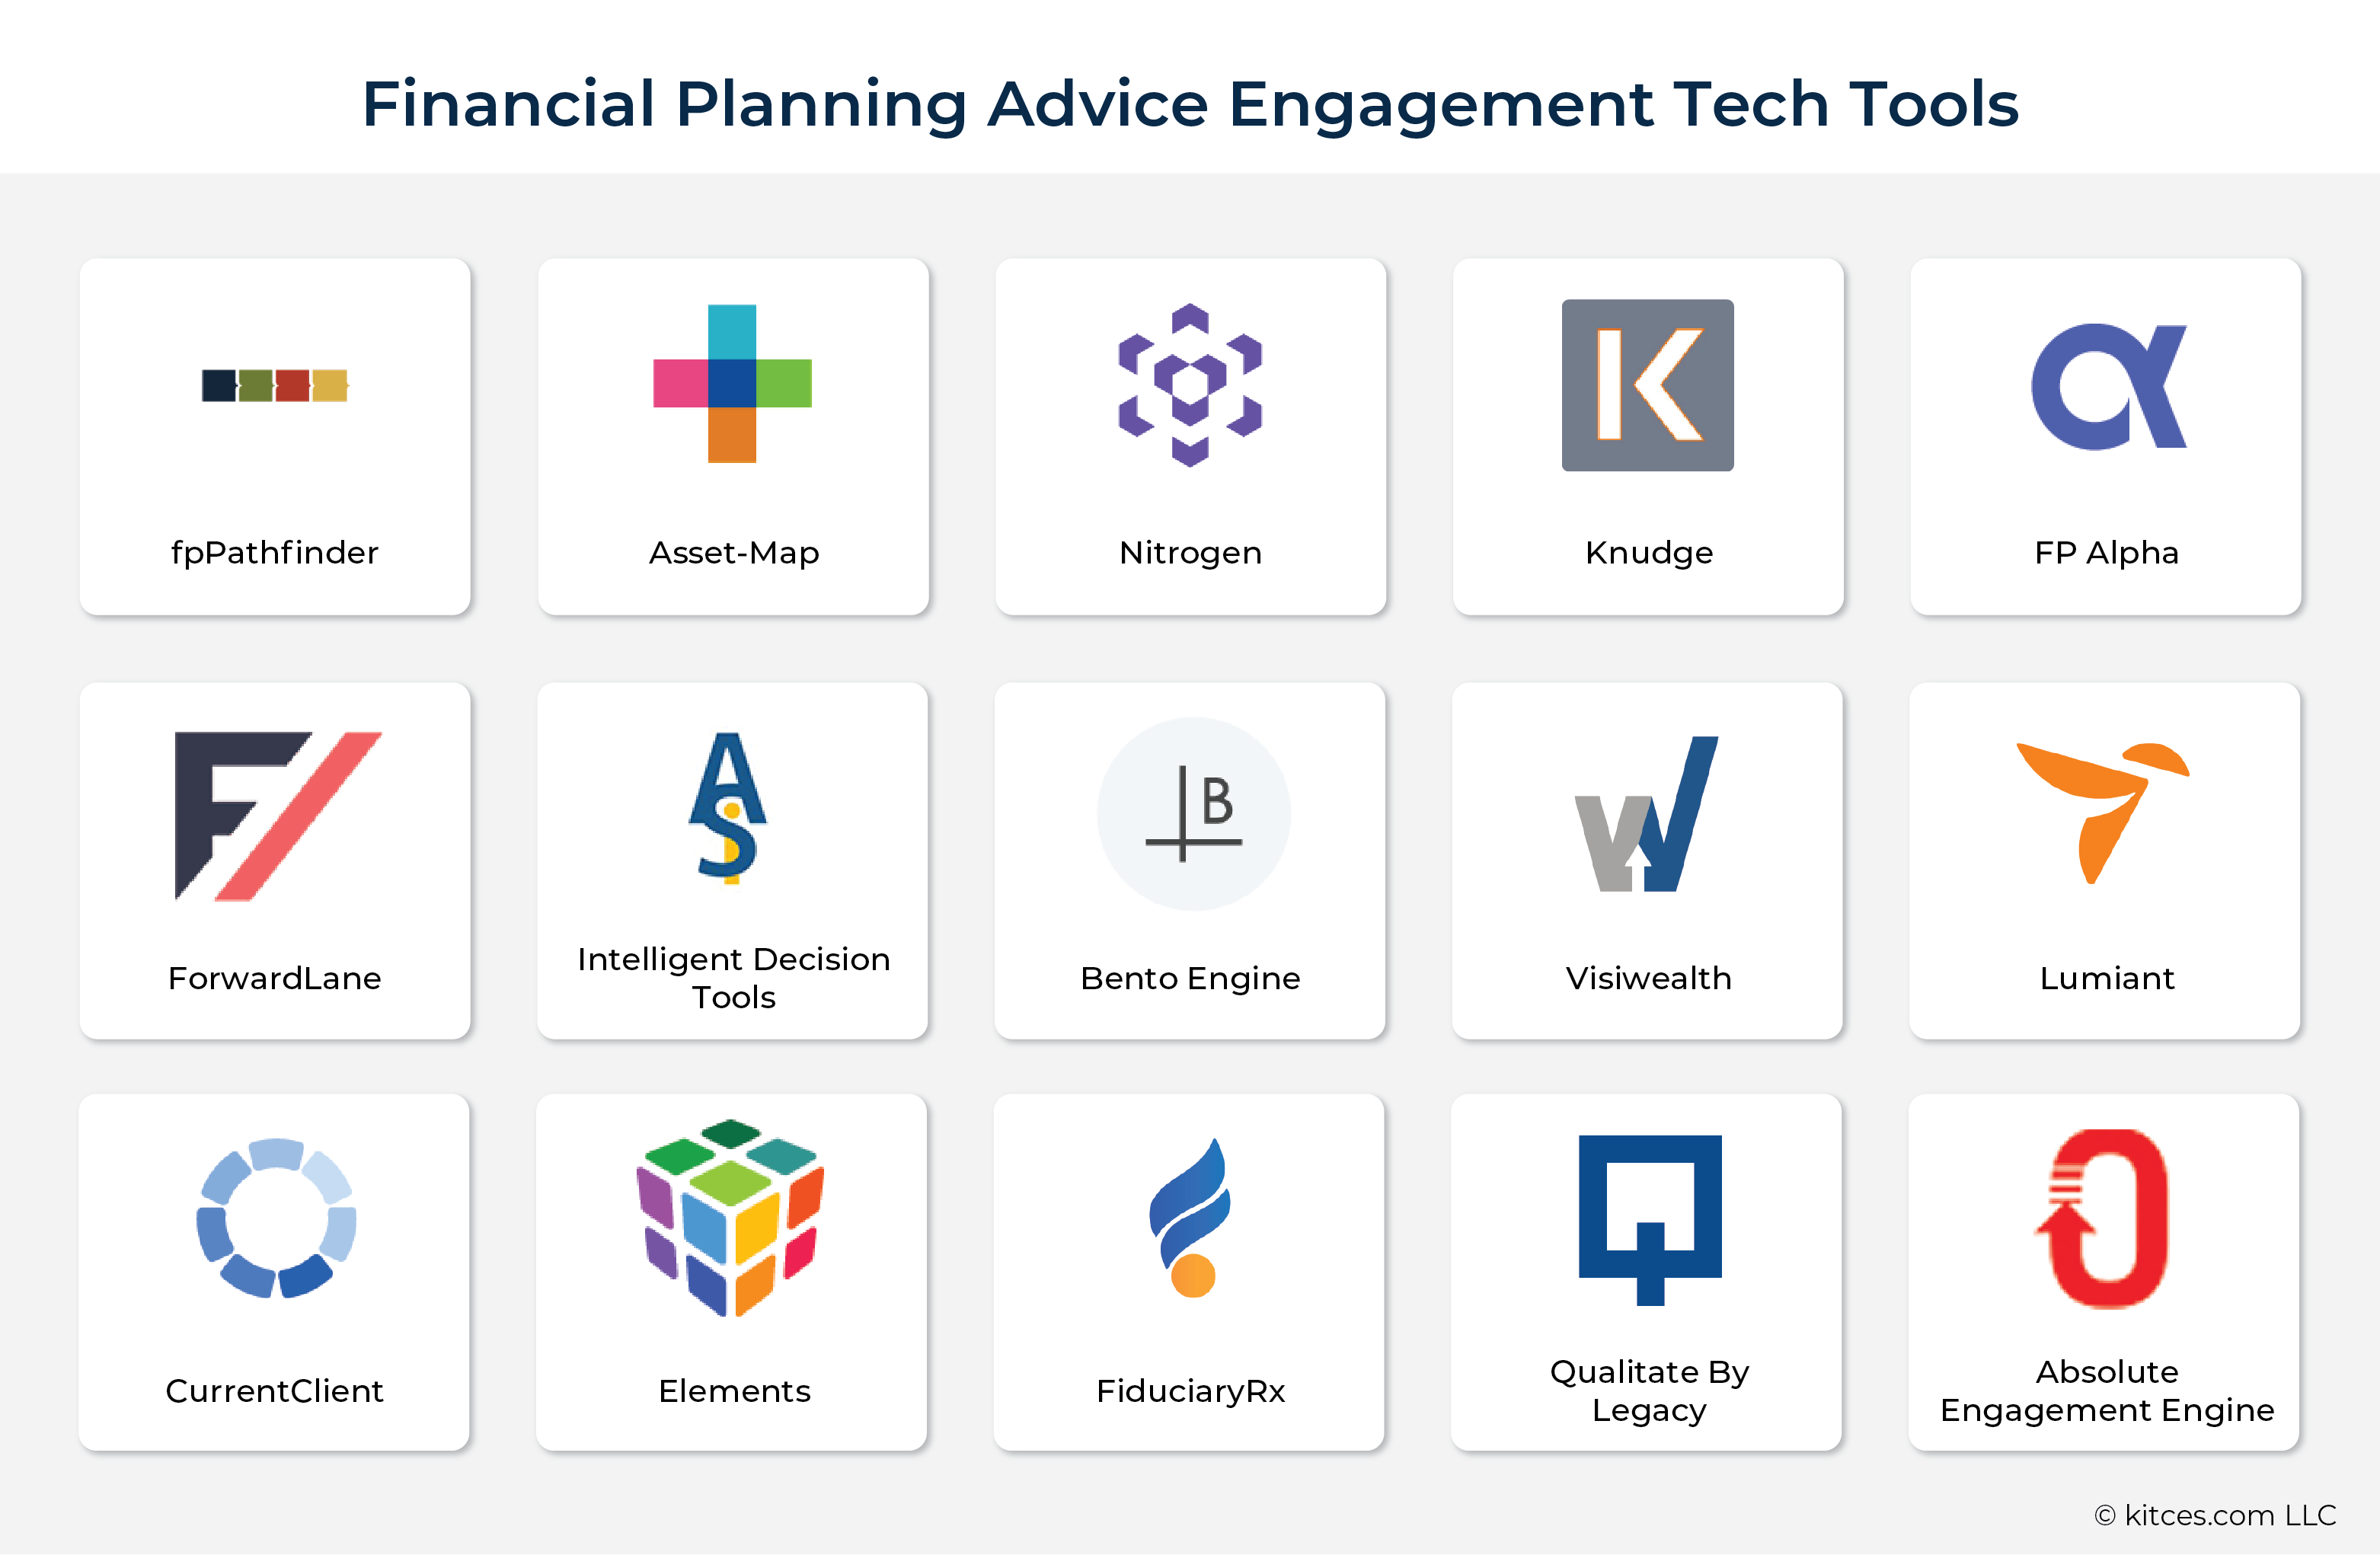 Financial Planning Advice Engagement Tech Tools